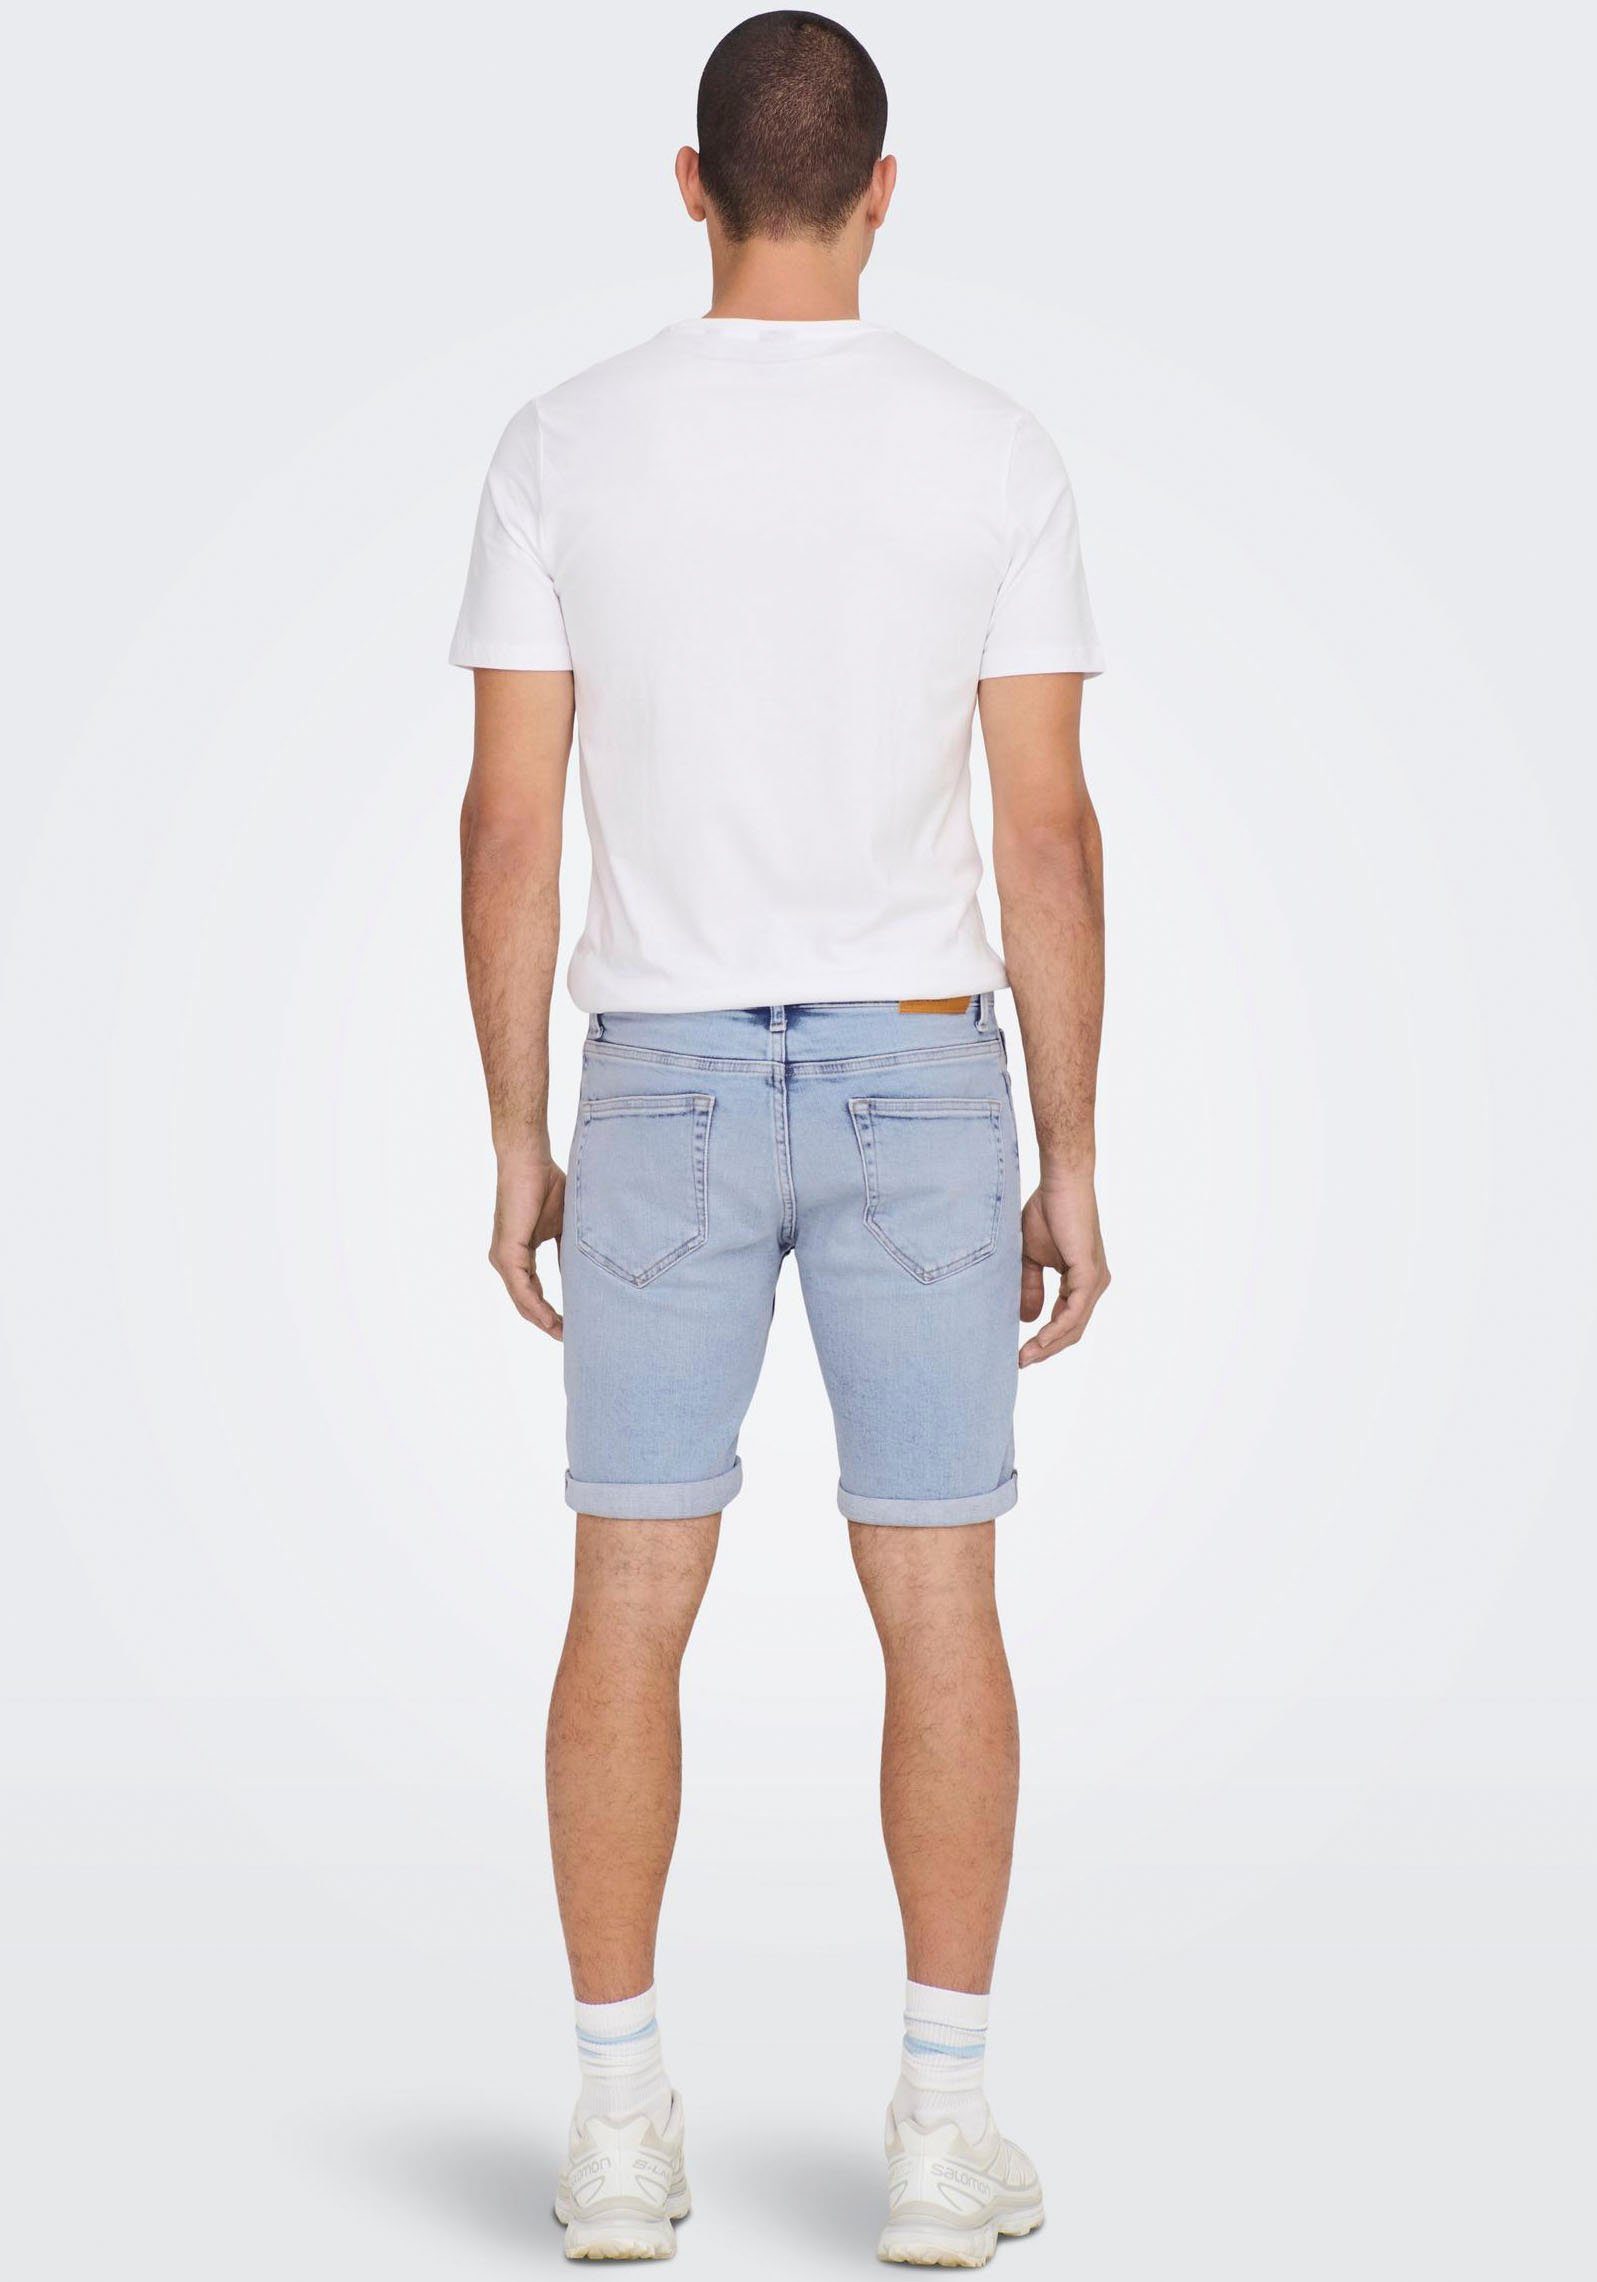 Denim 5189 Blue Light ONSPLY ONLY BLUE NOOS SONS & DNM Jeansshorts SHORTS LIGHT